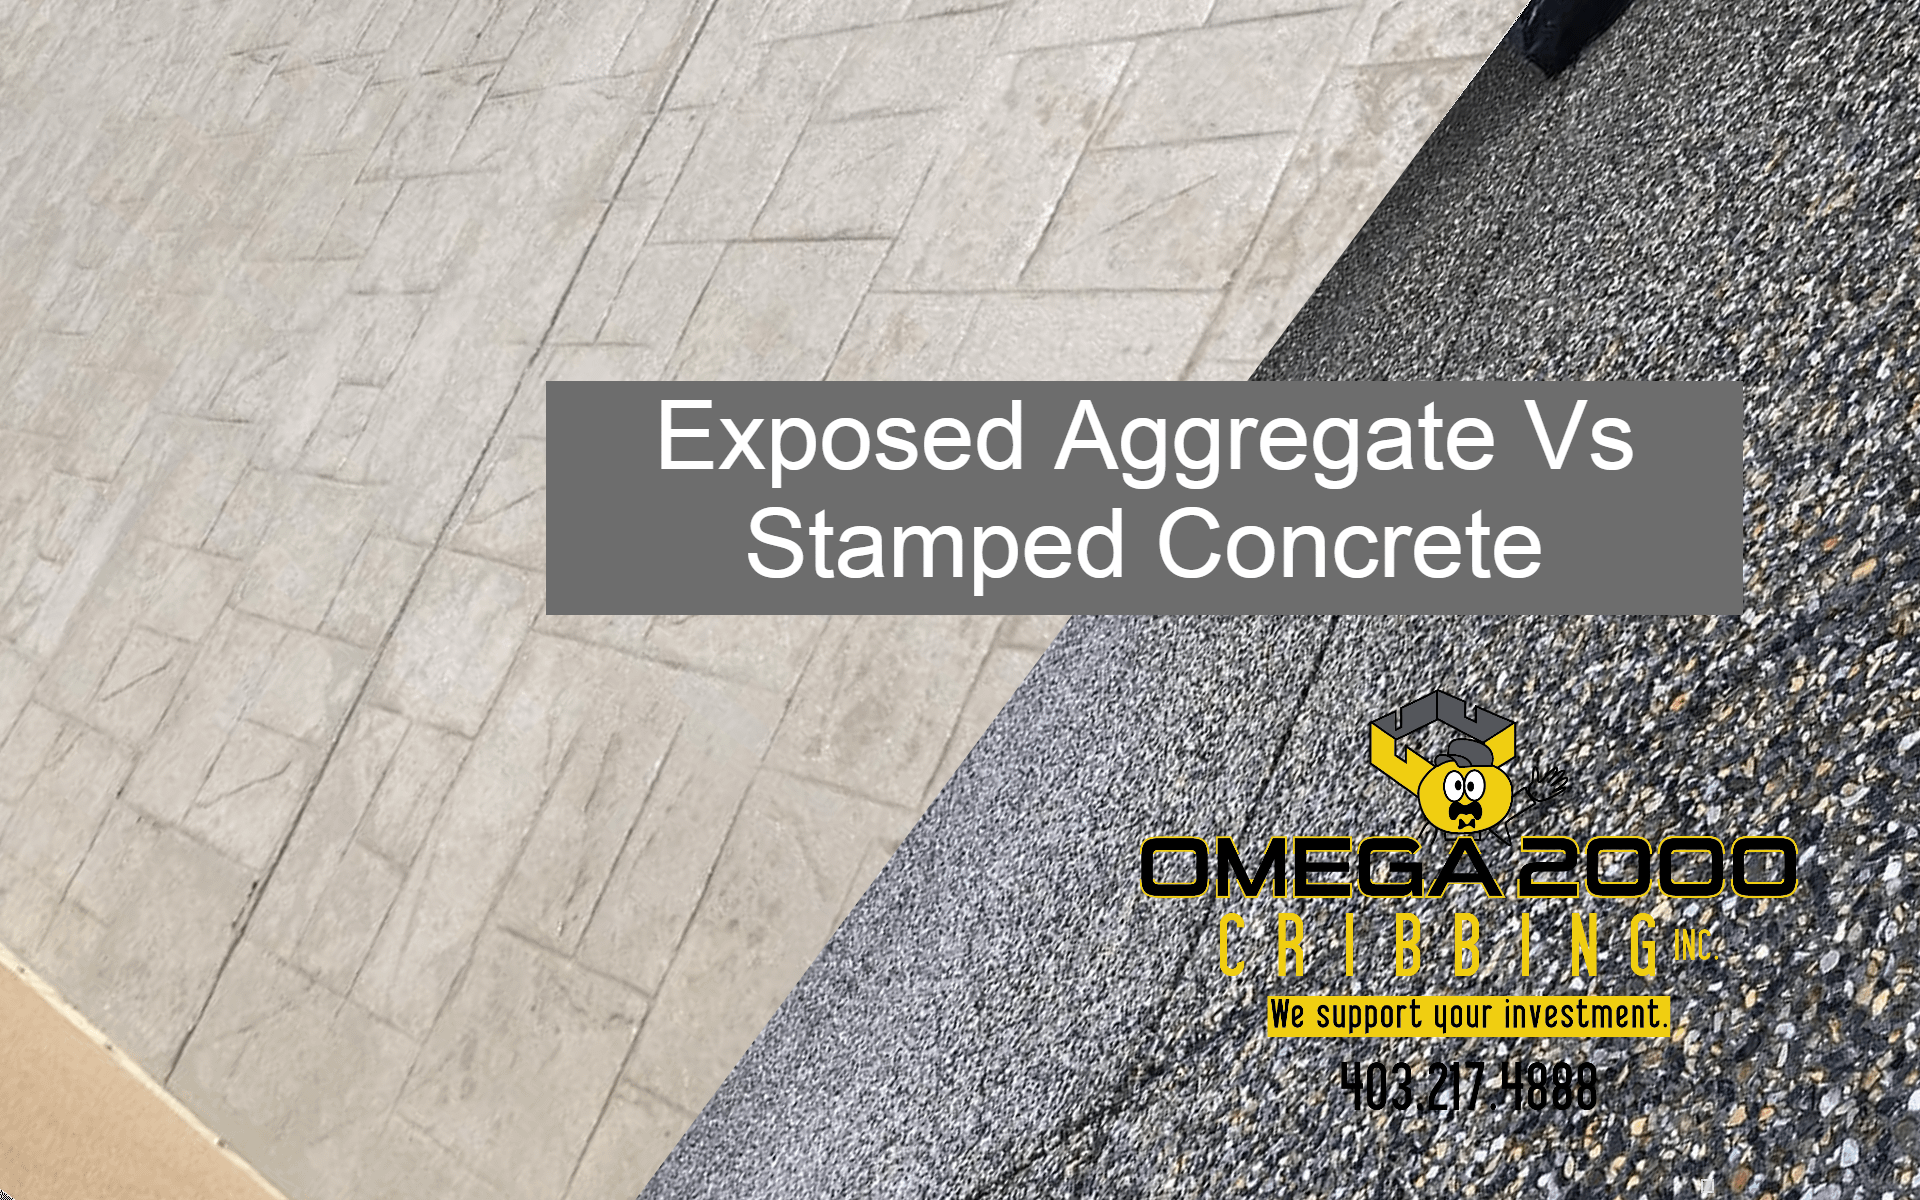 Exposed Aggregate vs Stamped Concrete